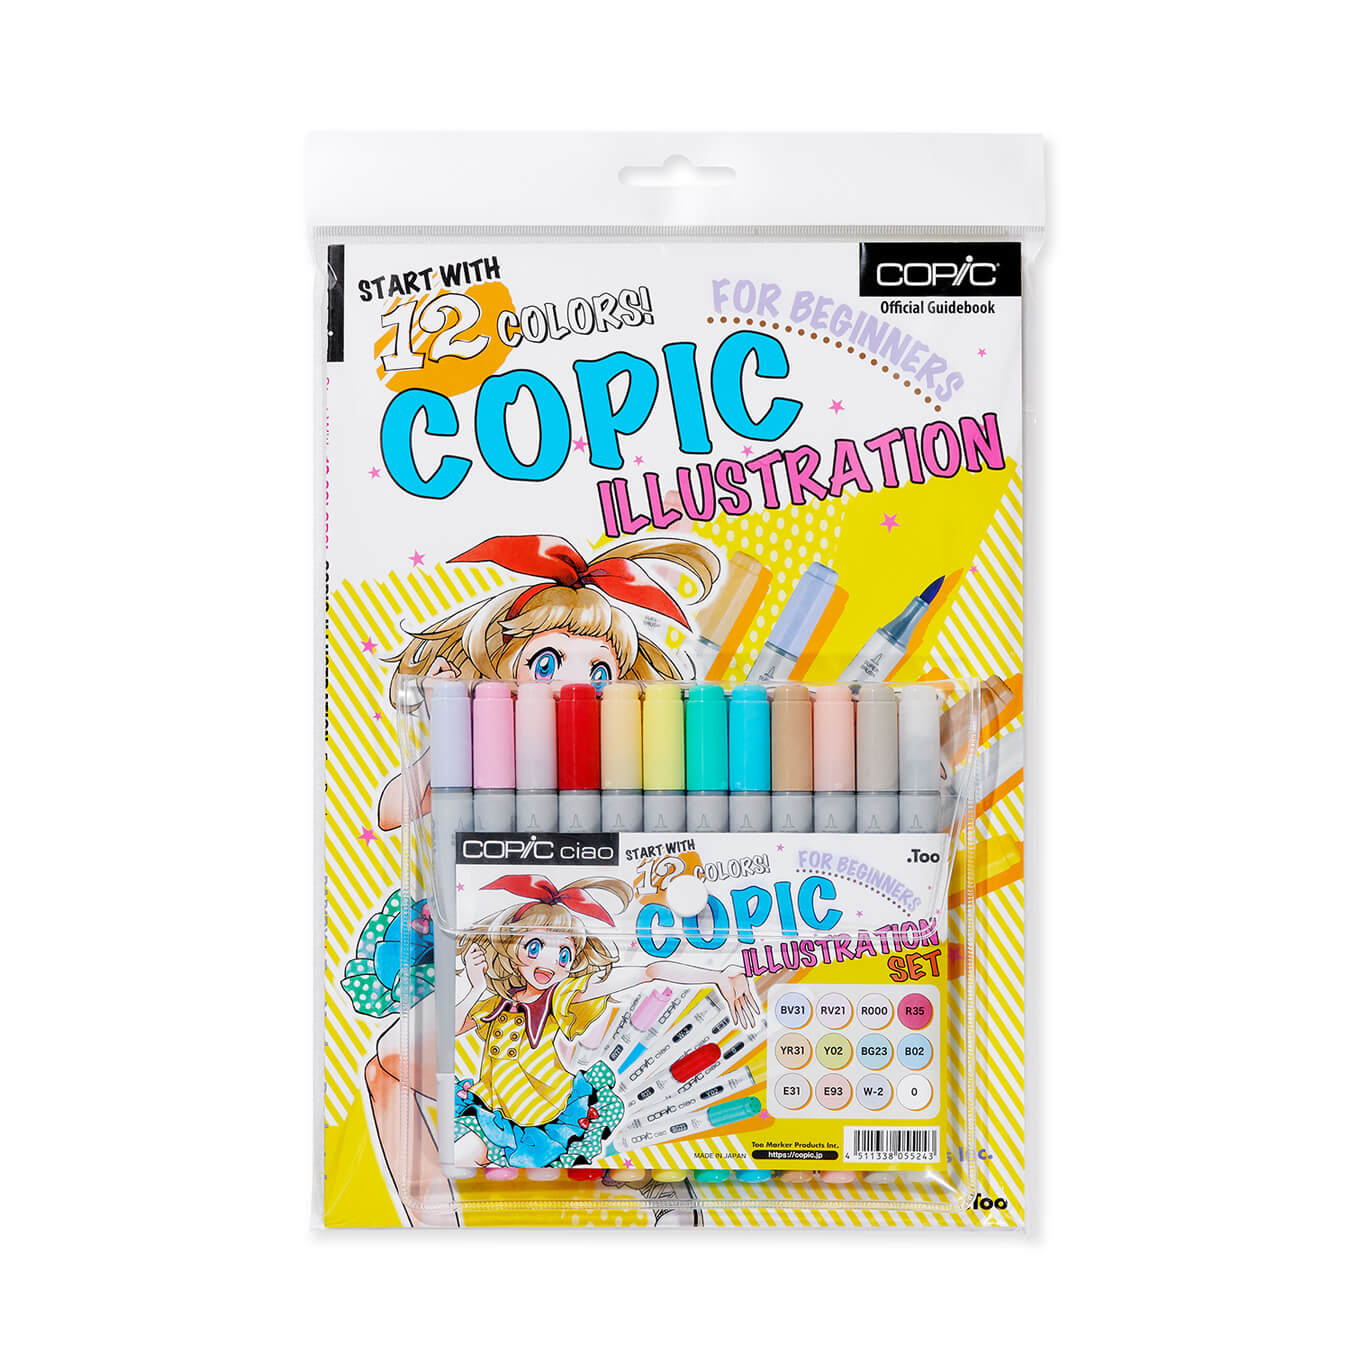 Copic Ciao 12 colors set with the book